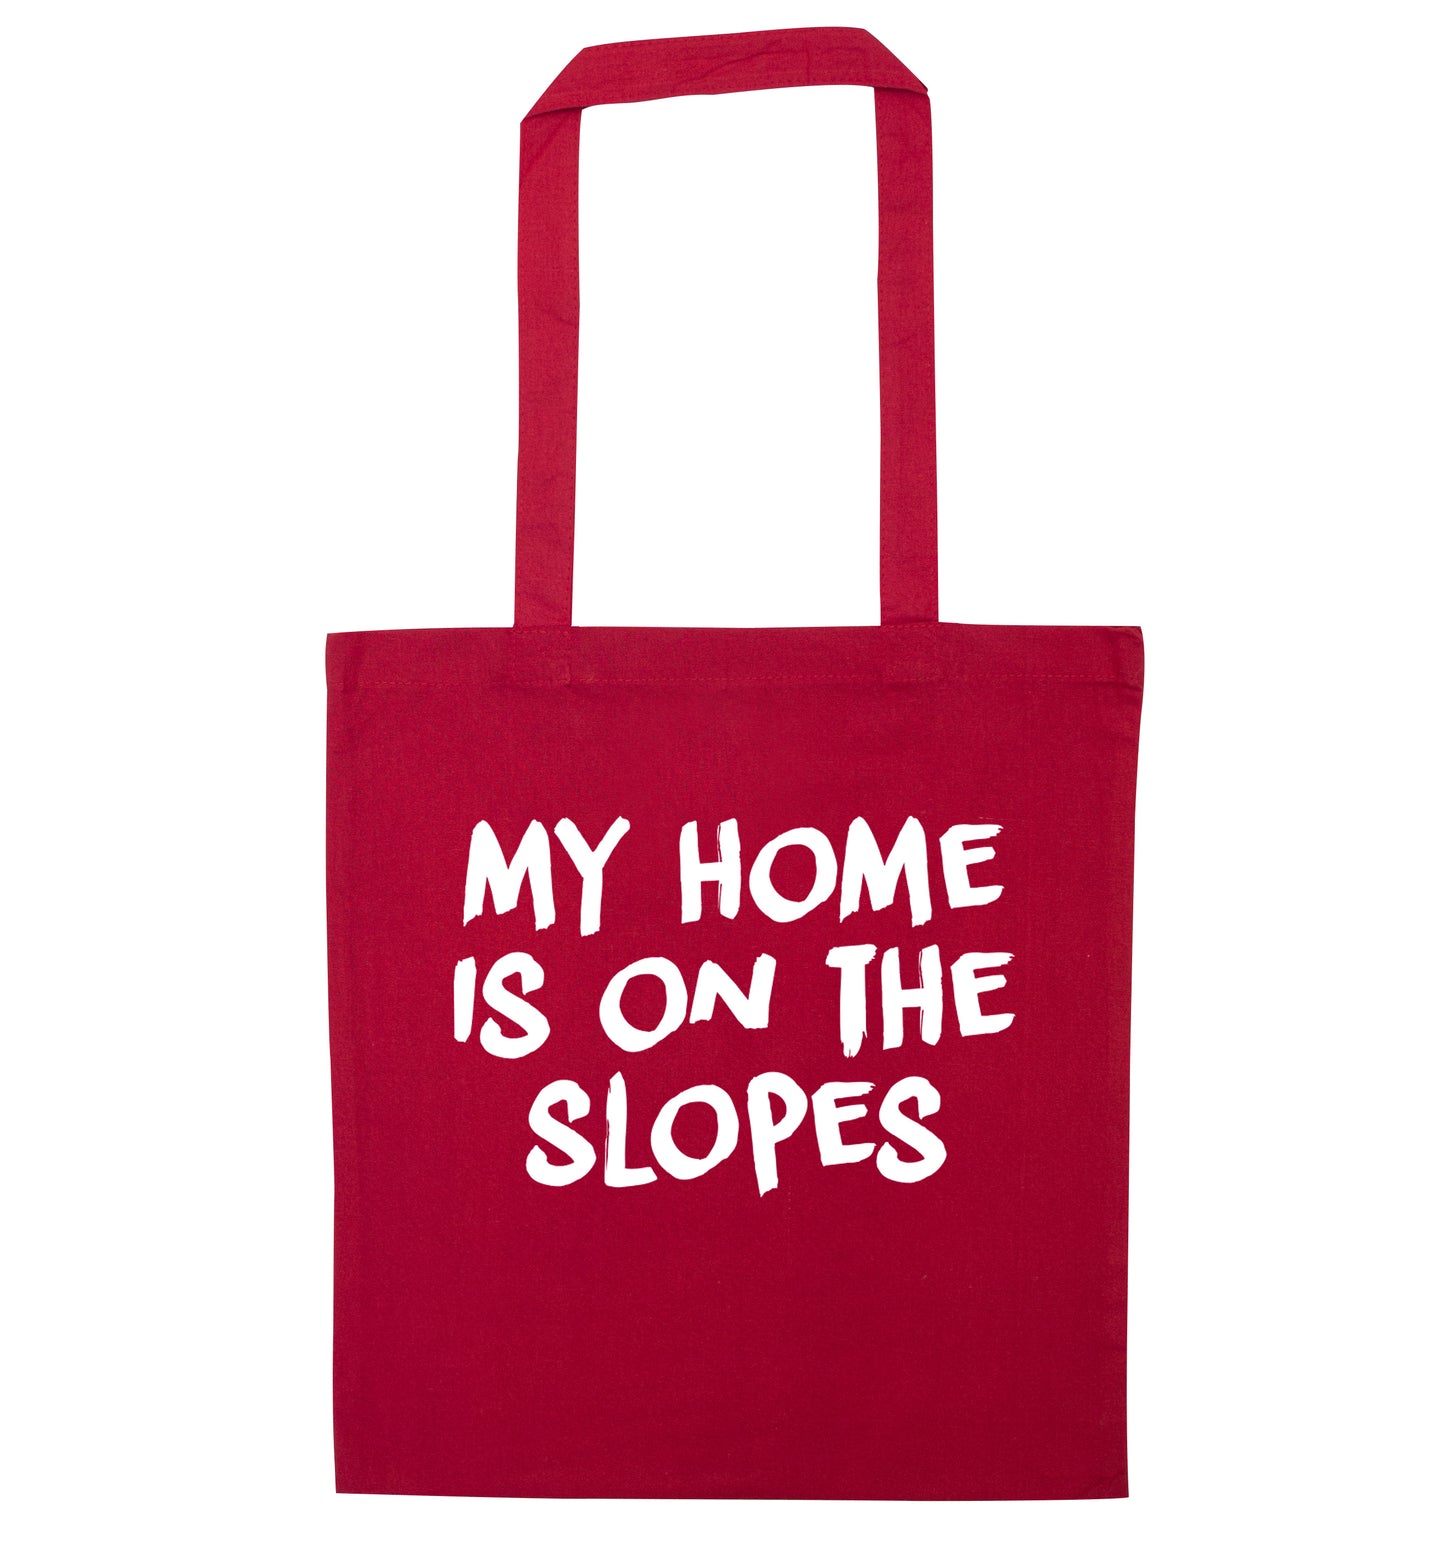 My home is on the slopes red tote bag